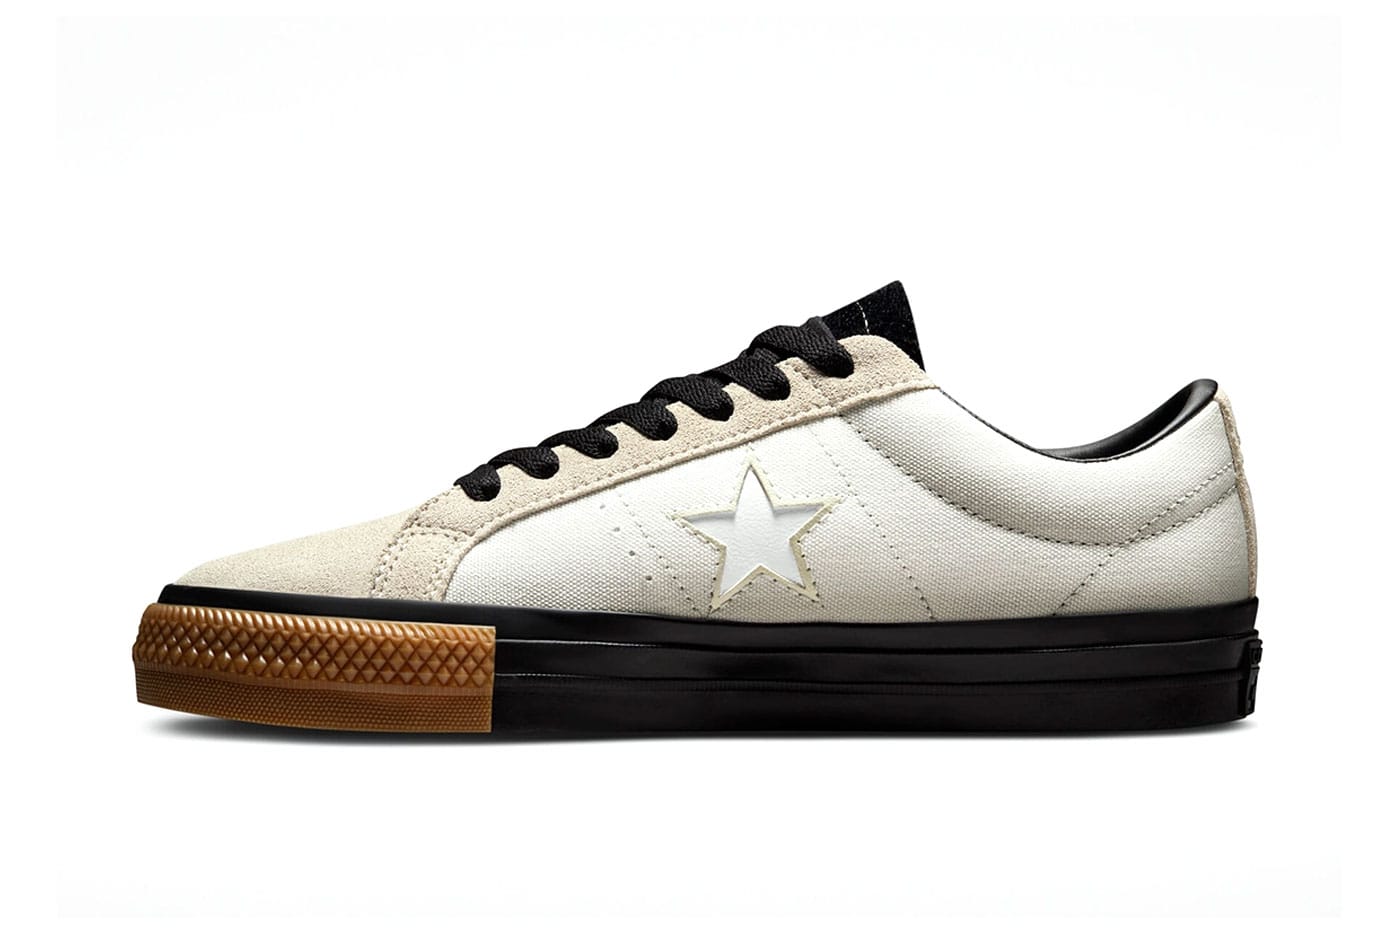 Converse CONS x Carhartt WIP Release One Star Pro and Fastbreak ... ابل ايفون